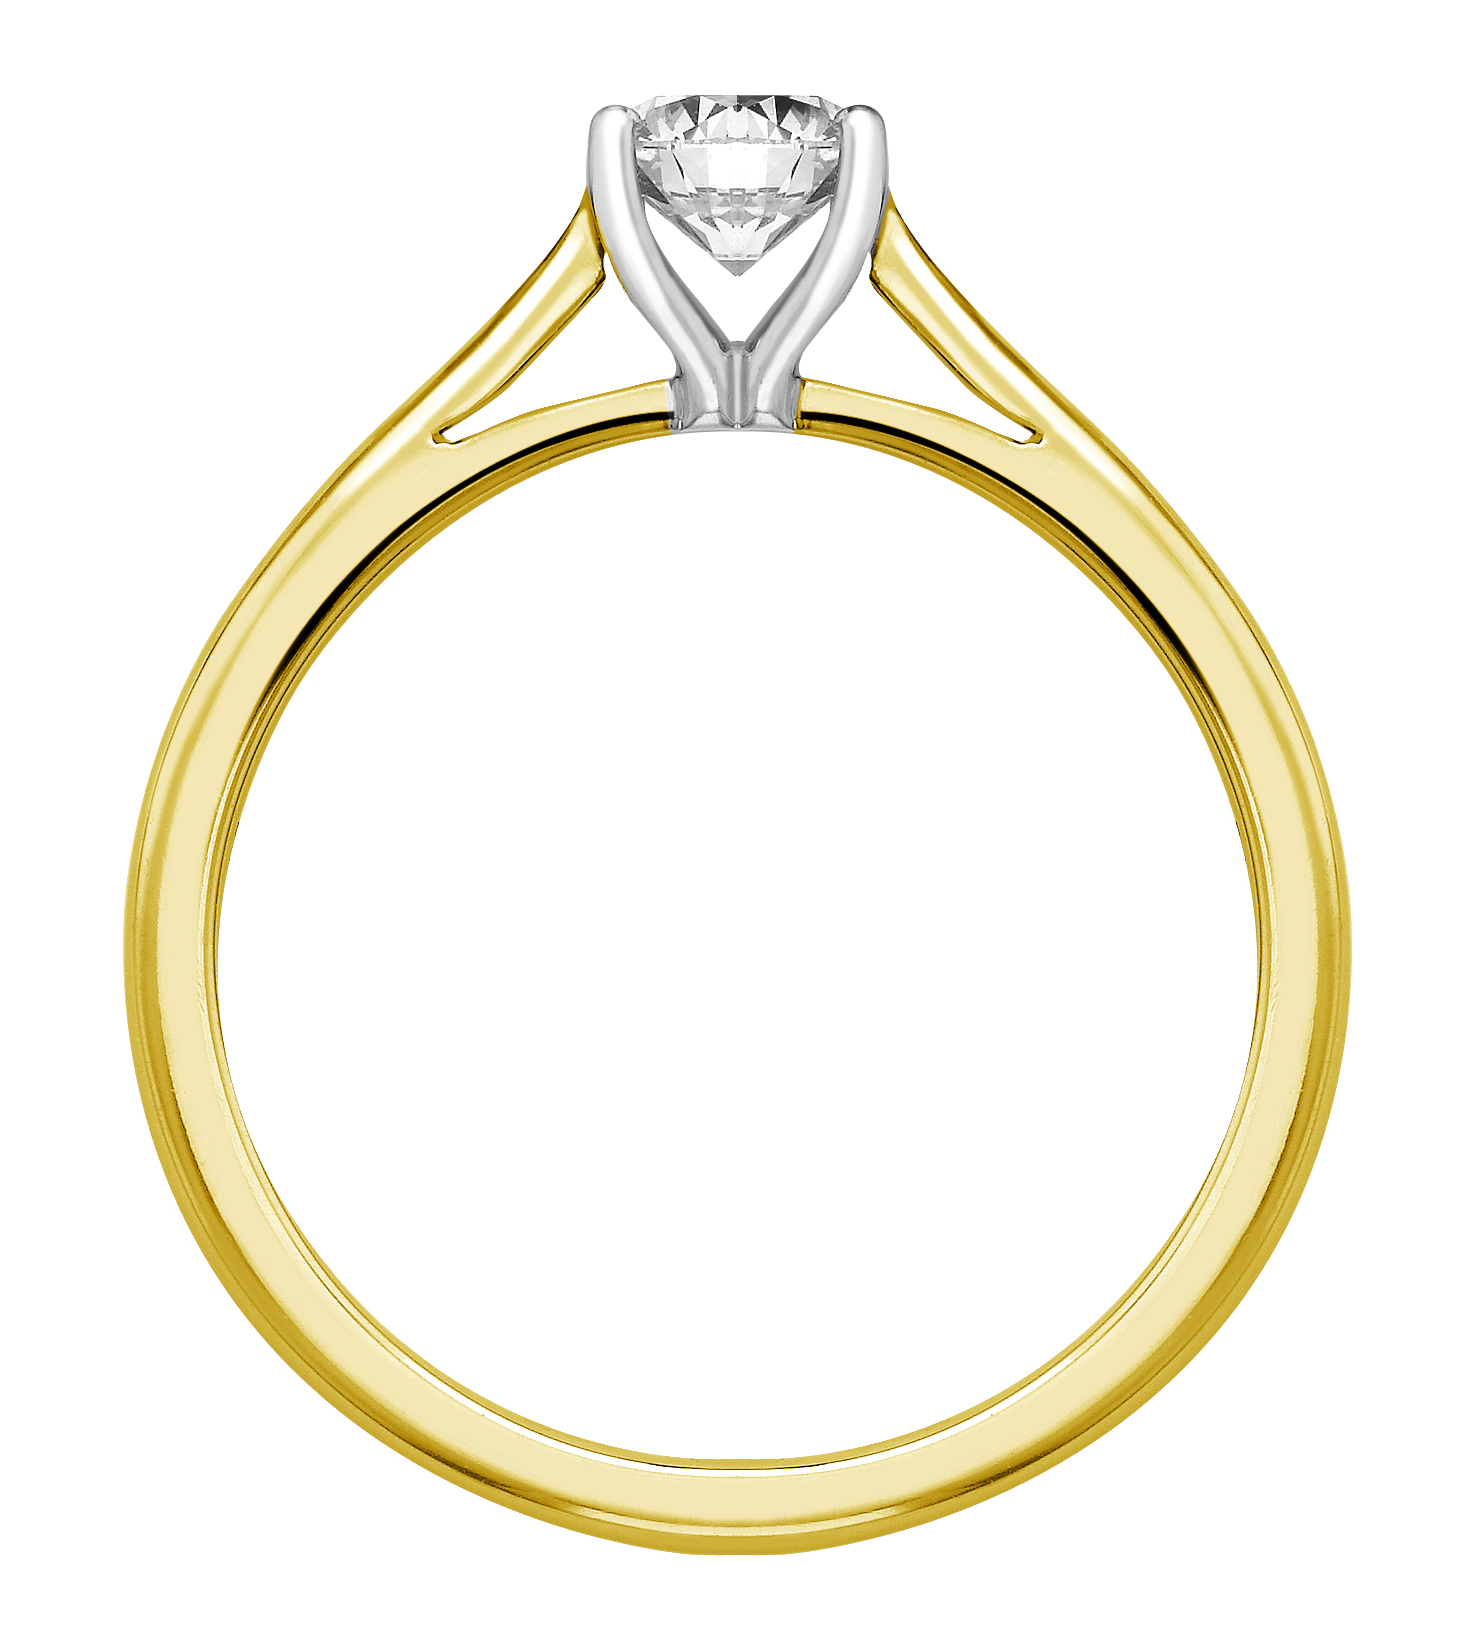 Round Four Claw Yellow Gold Engagement Ring GRC783YG Image 2